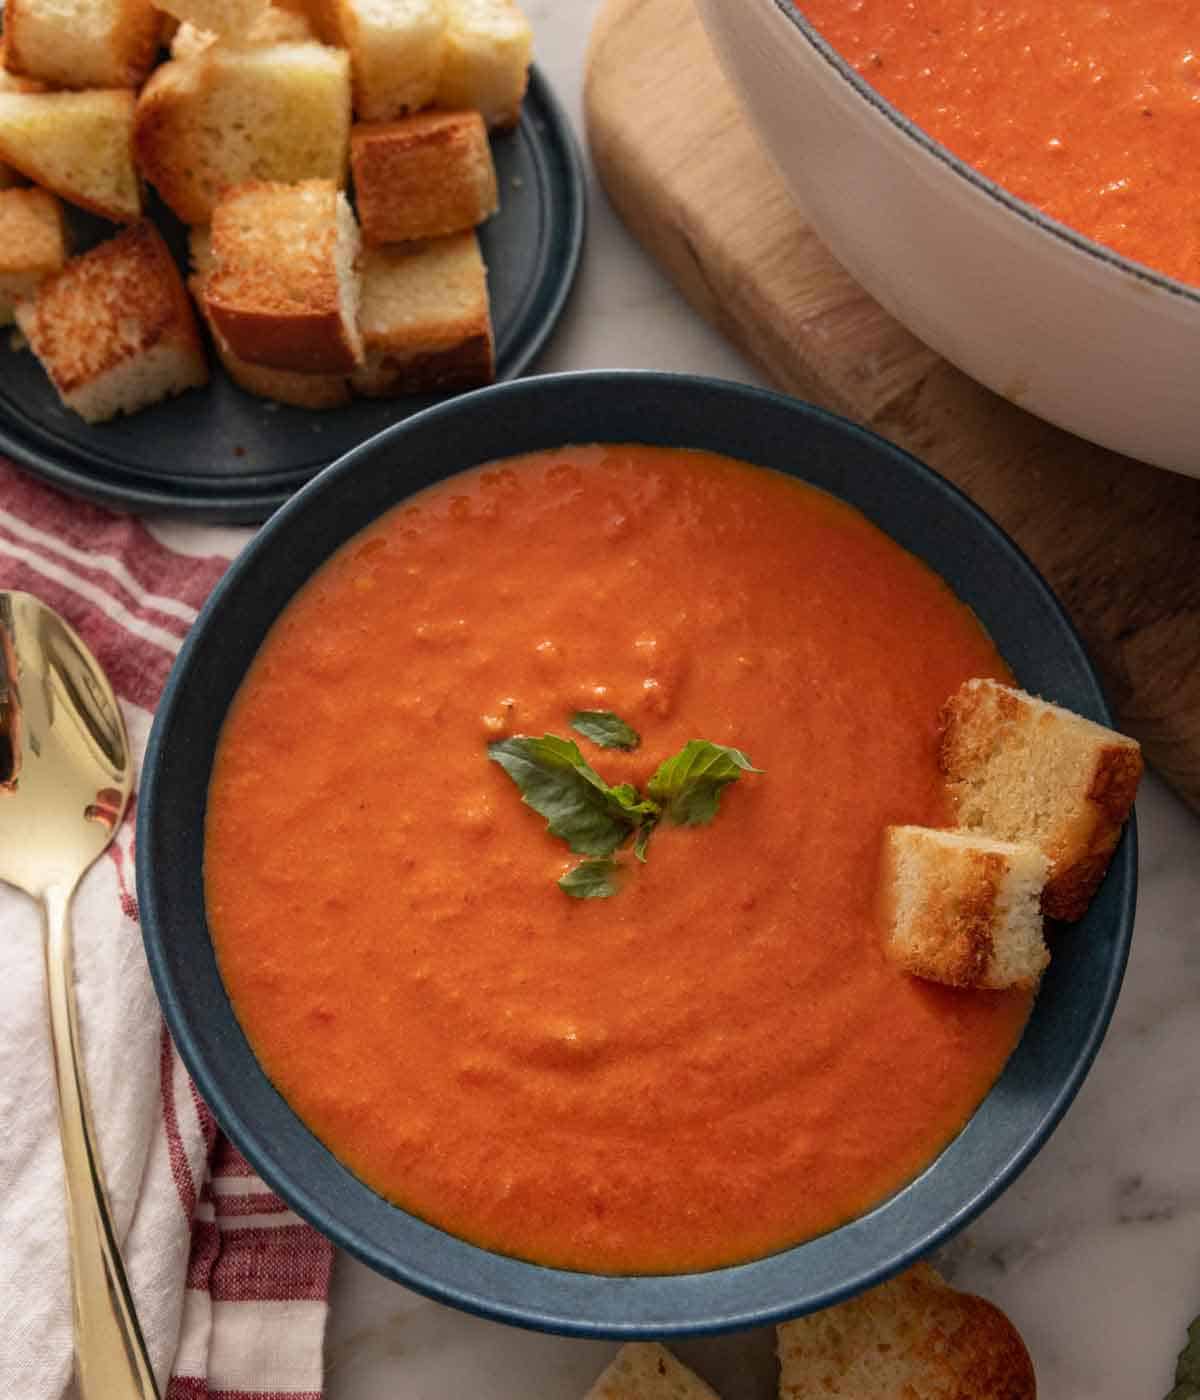 Overhead view of a bowl of tomato soup with basil and bread on top. A plate of bread off to the side along with a pot of the soup.